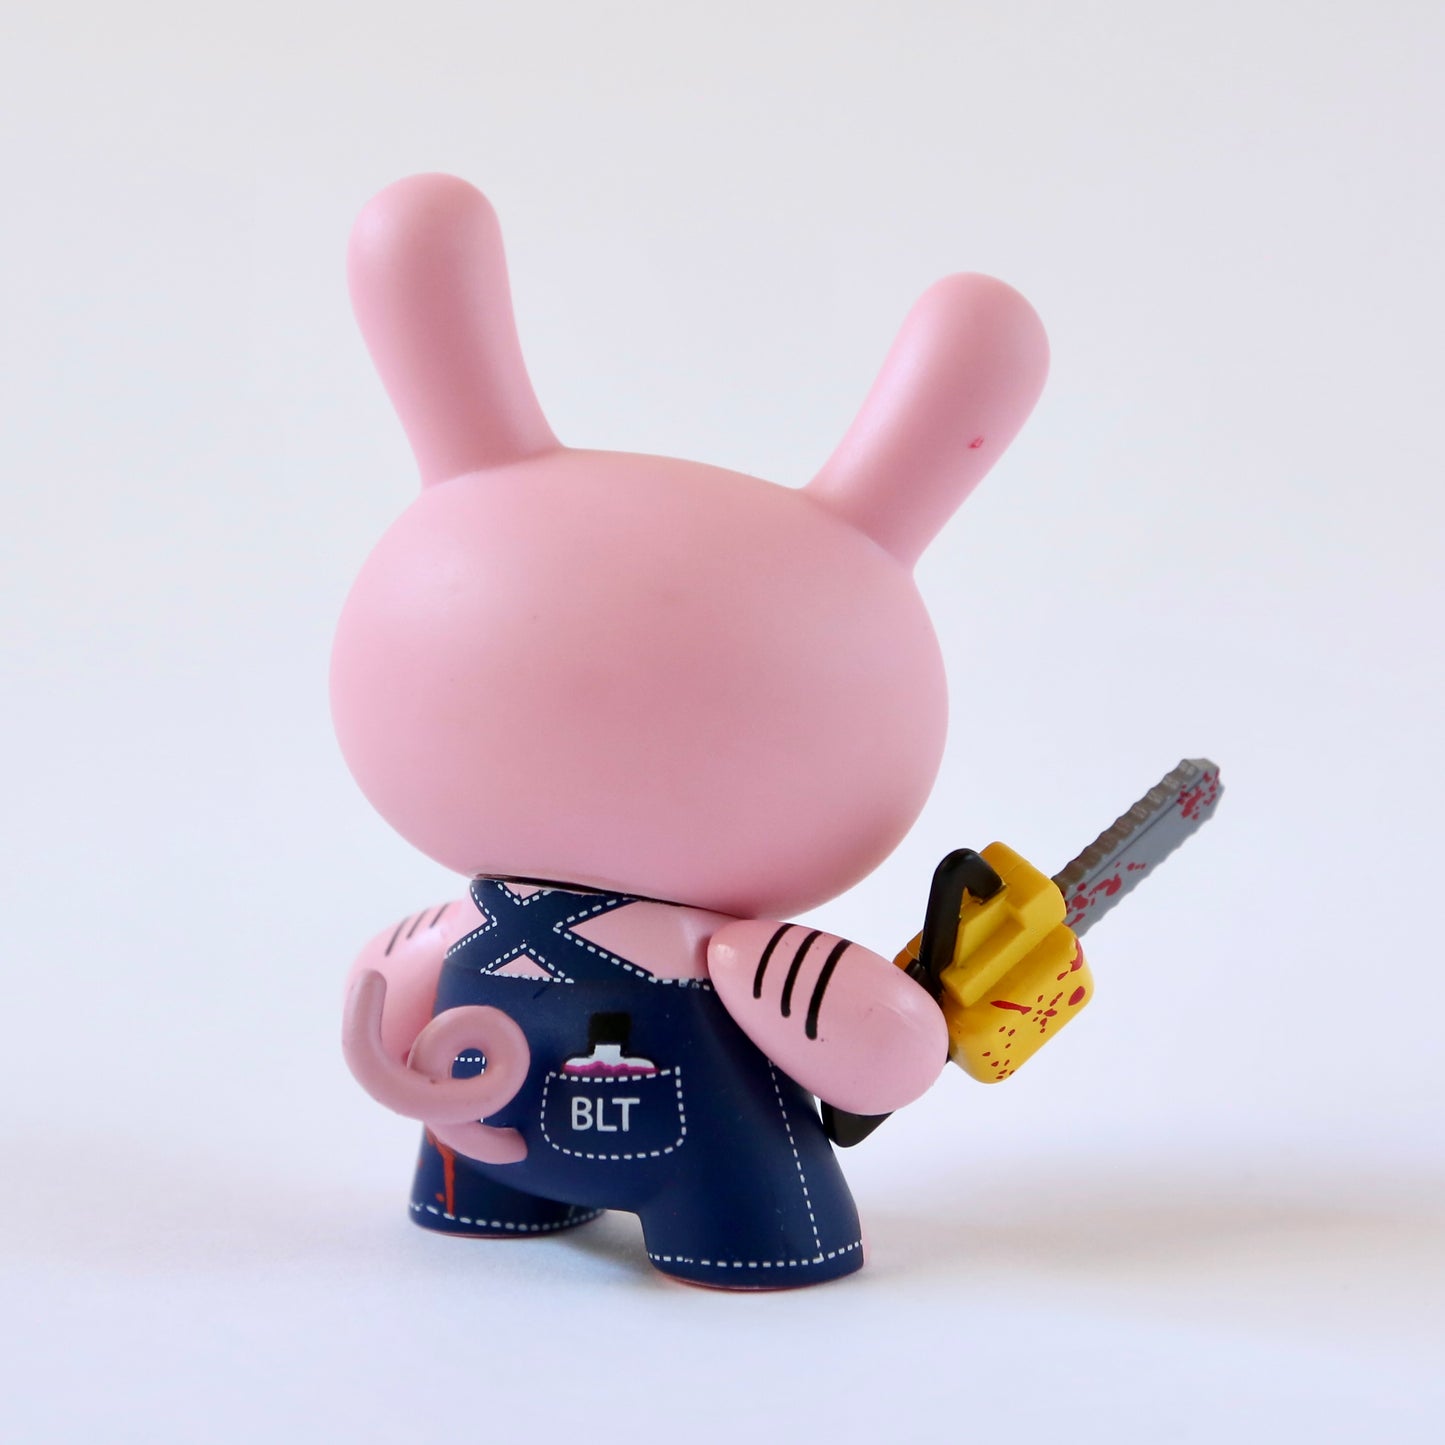 "Bacon" (2/20)  3in Dunny by Sket One x Kidrobot